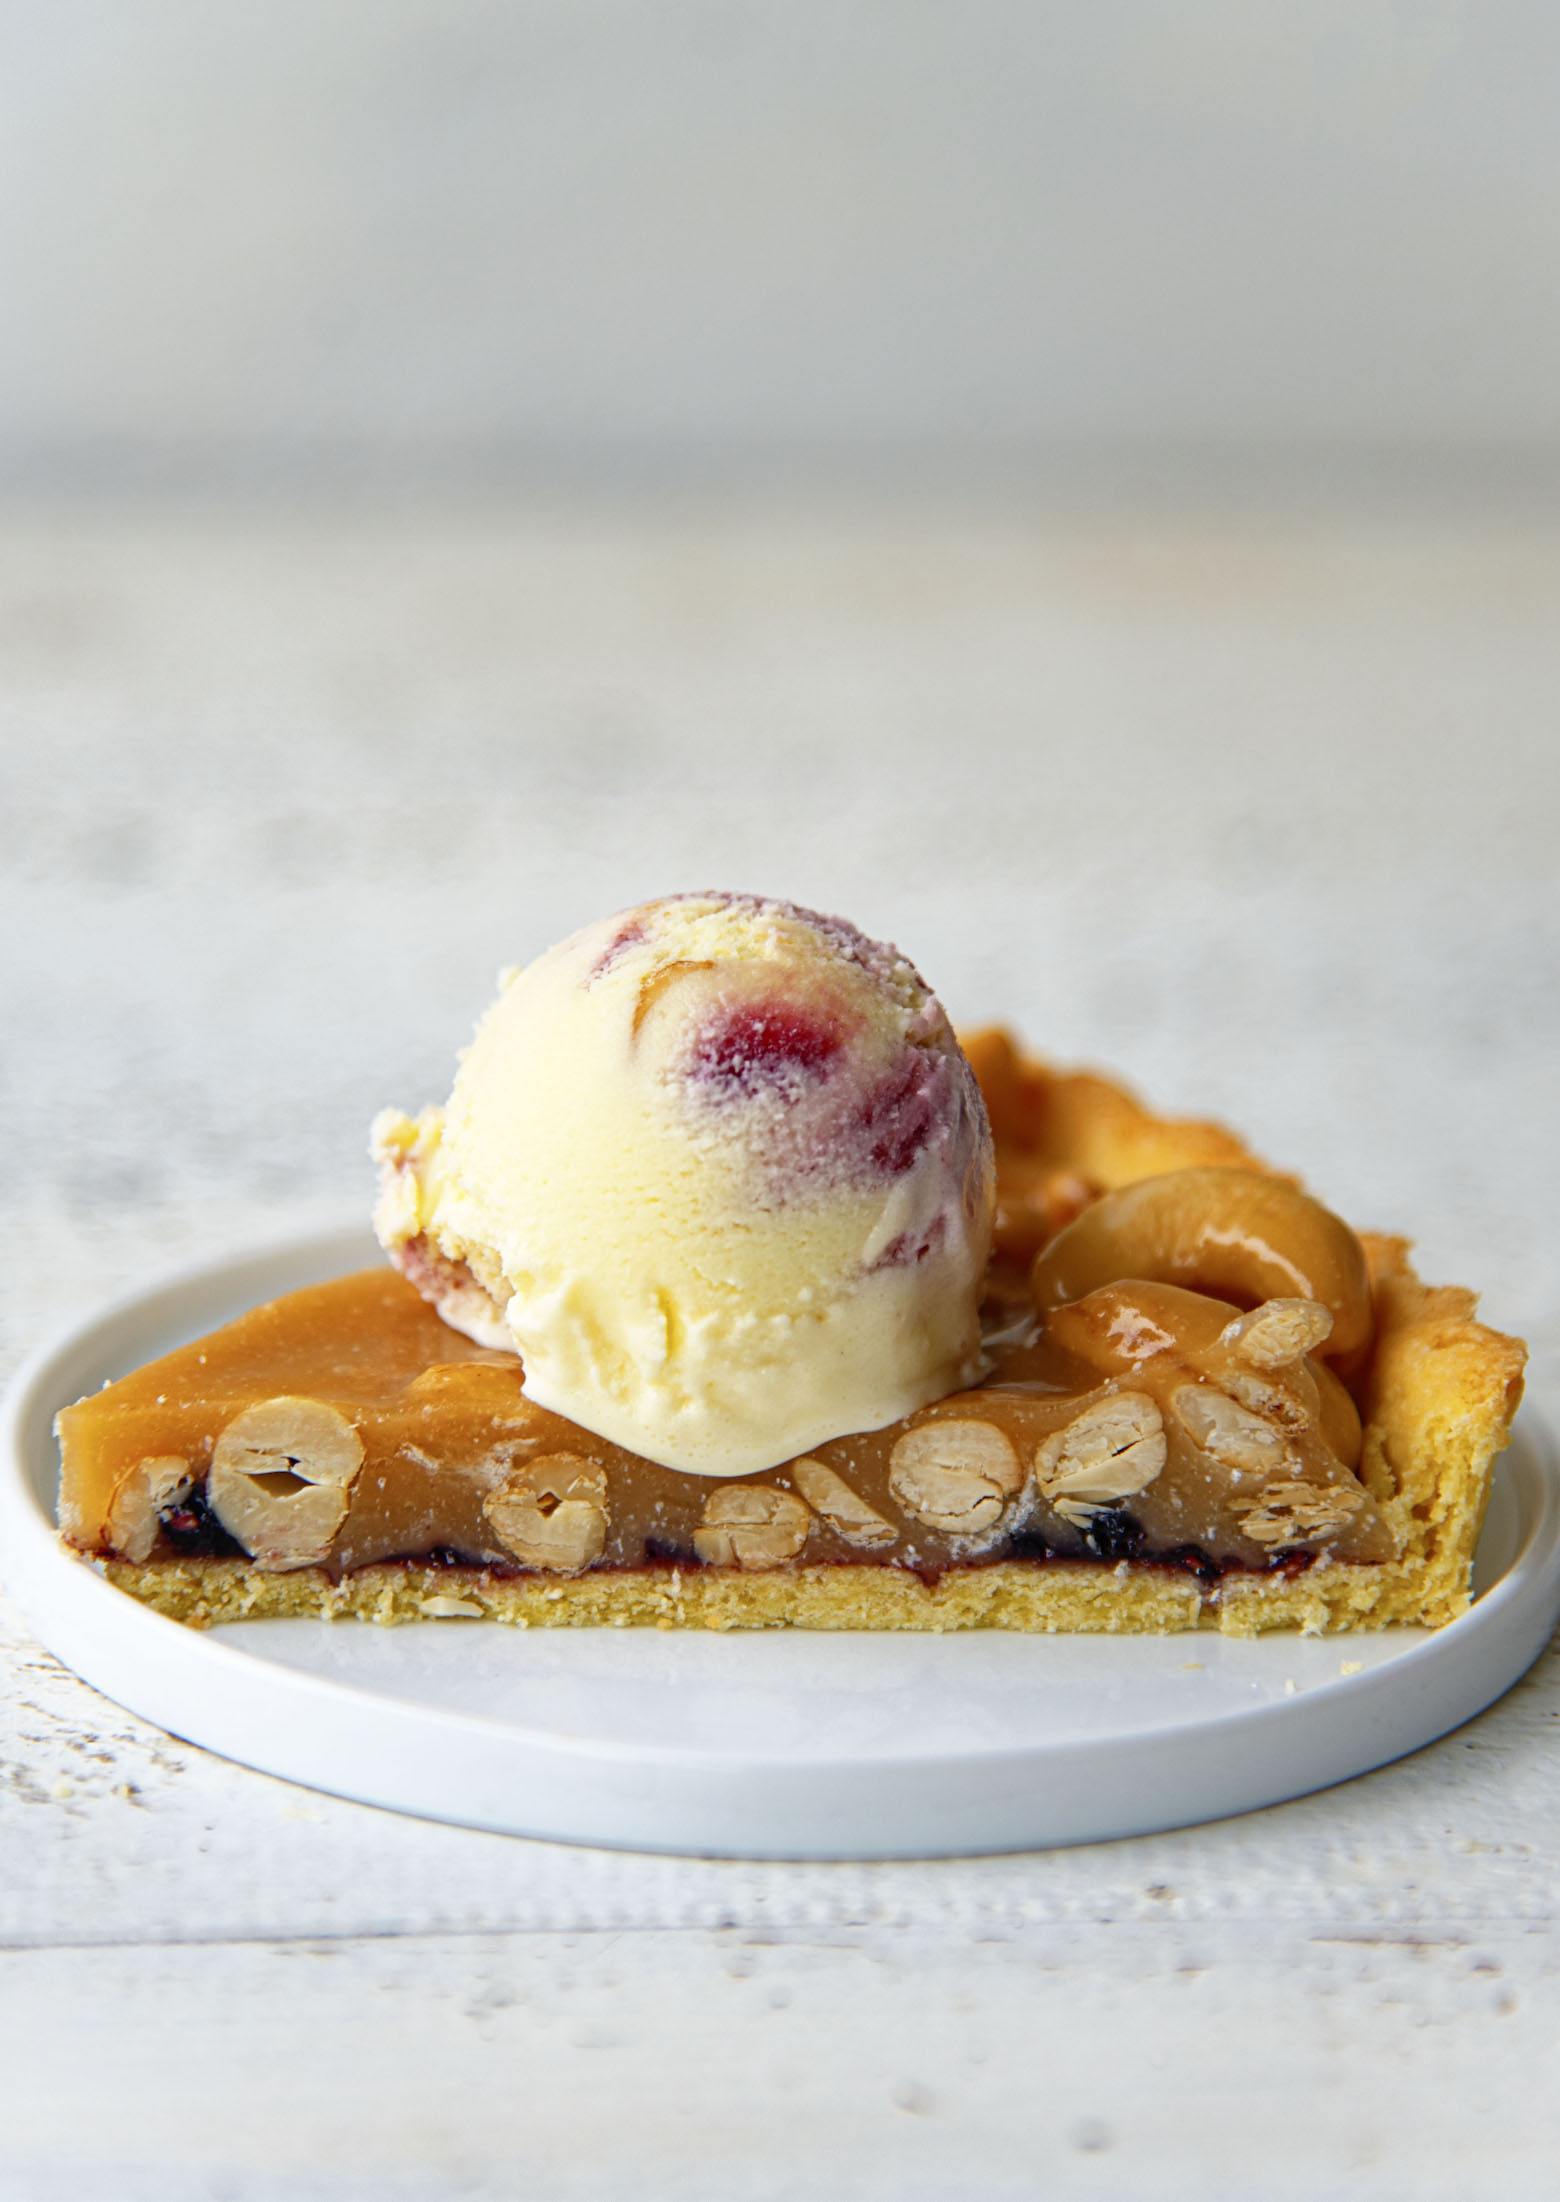 Side view of a piece of tart with a cross section exposing the cashews, jam layer, and bottom of tart. All topped with a scoop of ice cream. 